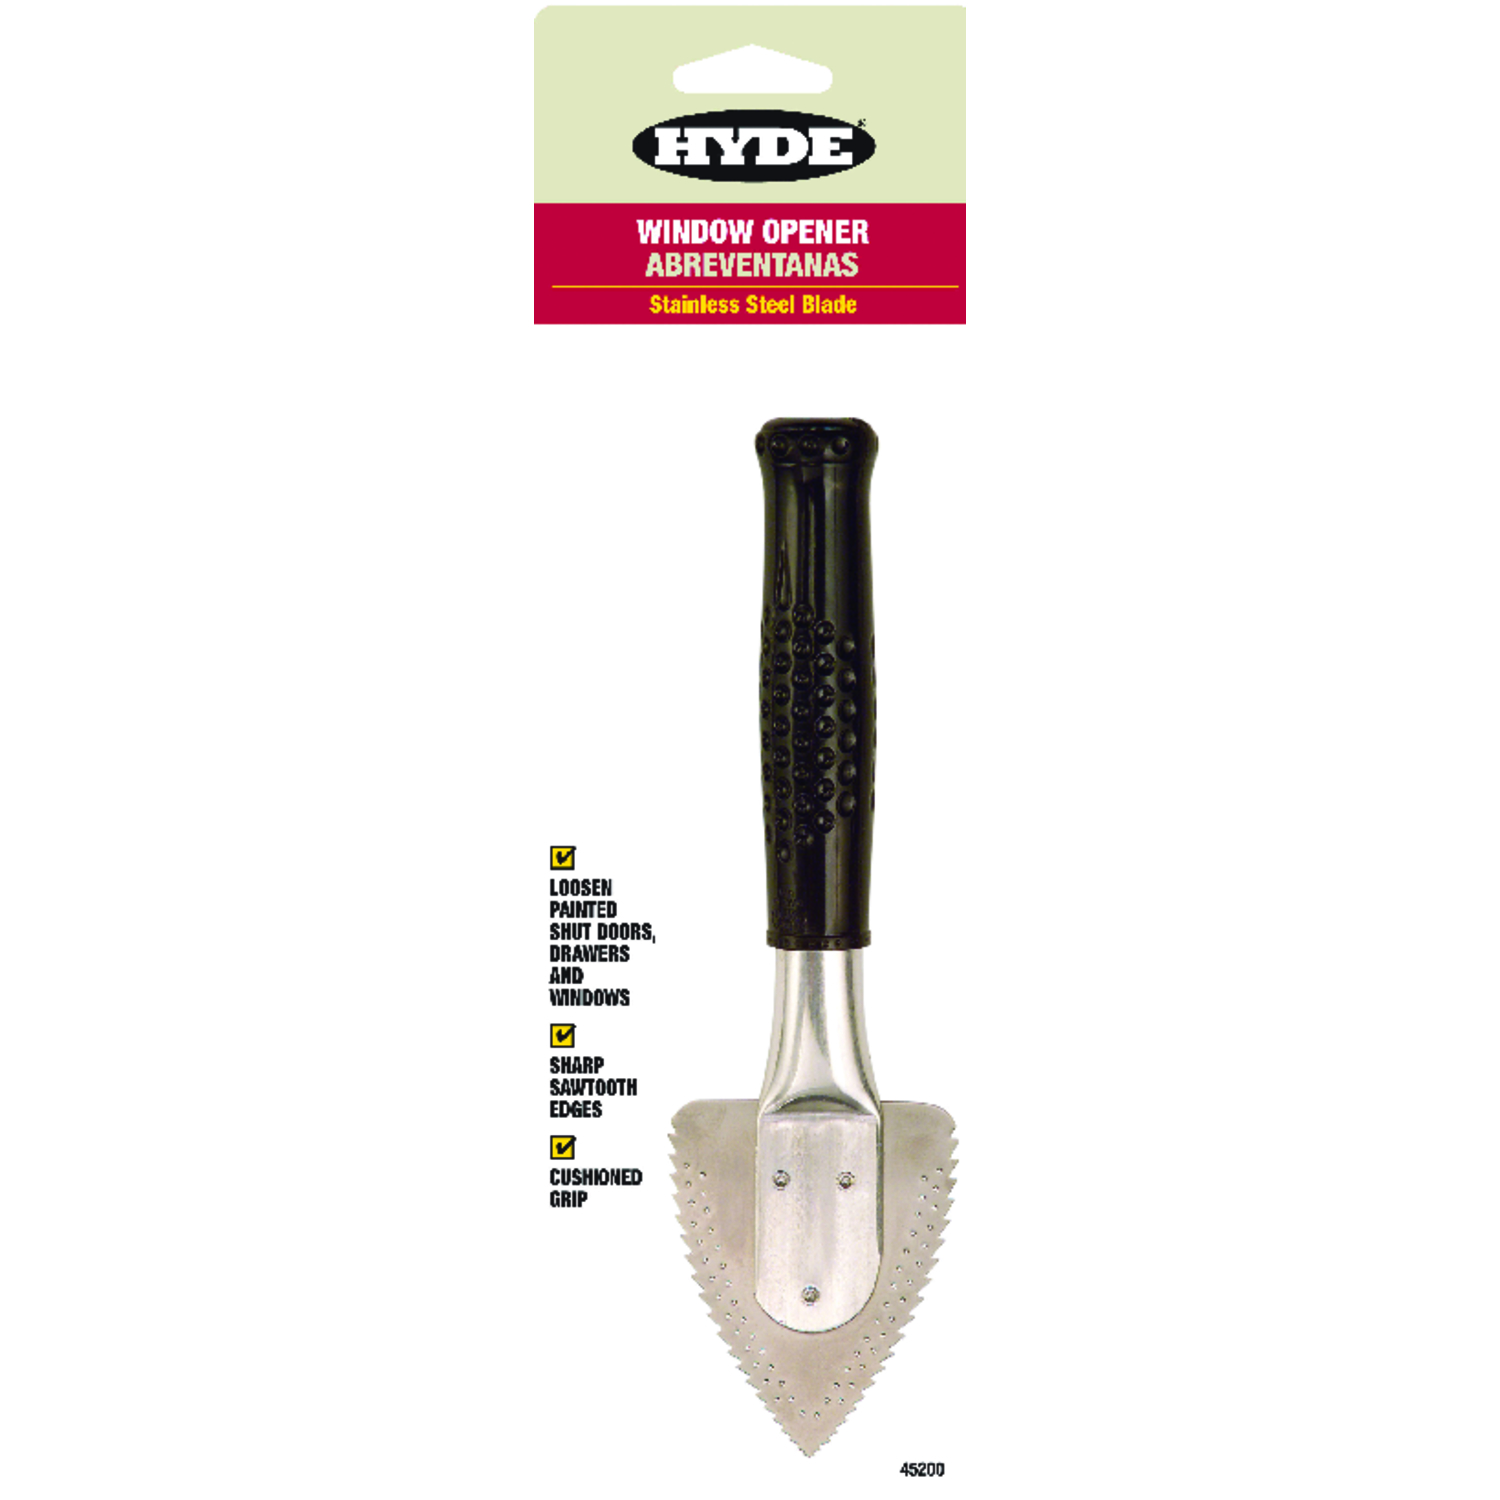 Photos - Putty Knife / Painting Tool Hyde Black Stainless Steel Window Opener 45200